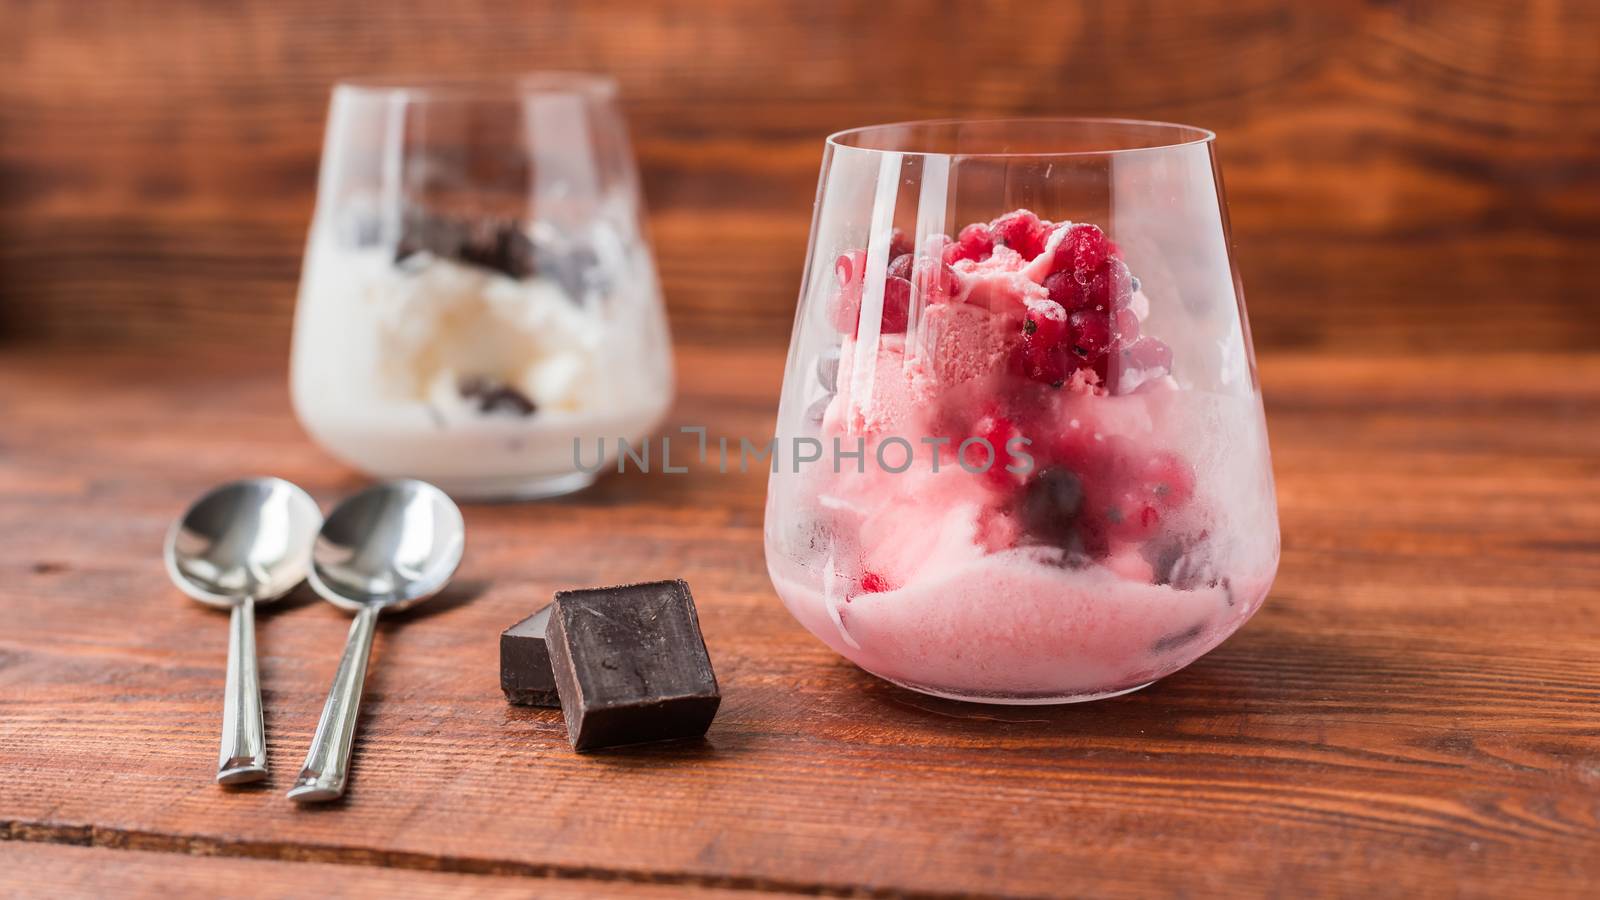 White and pink ice cream in glass on wooden table by Seva_blsv